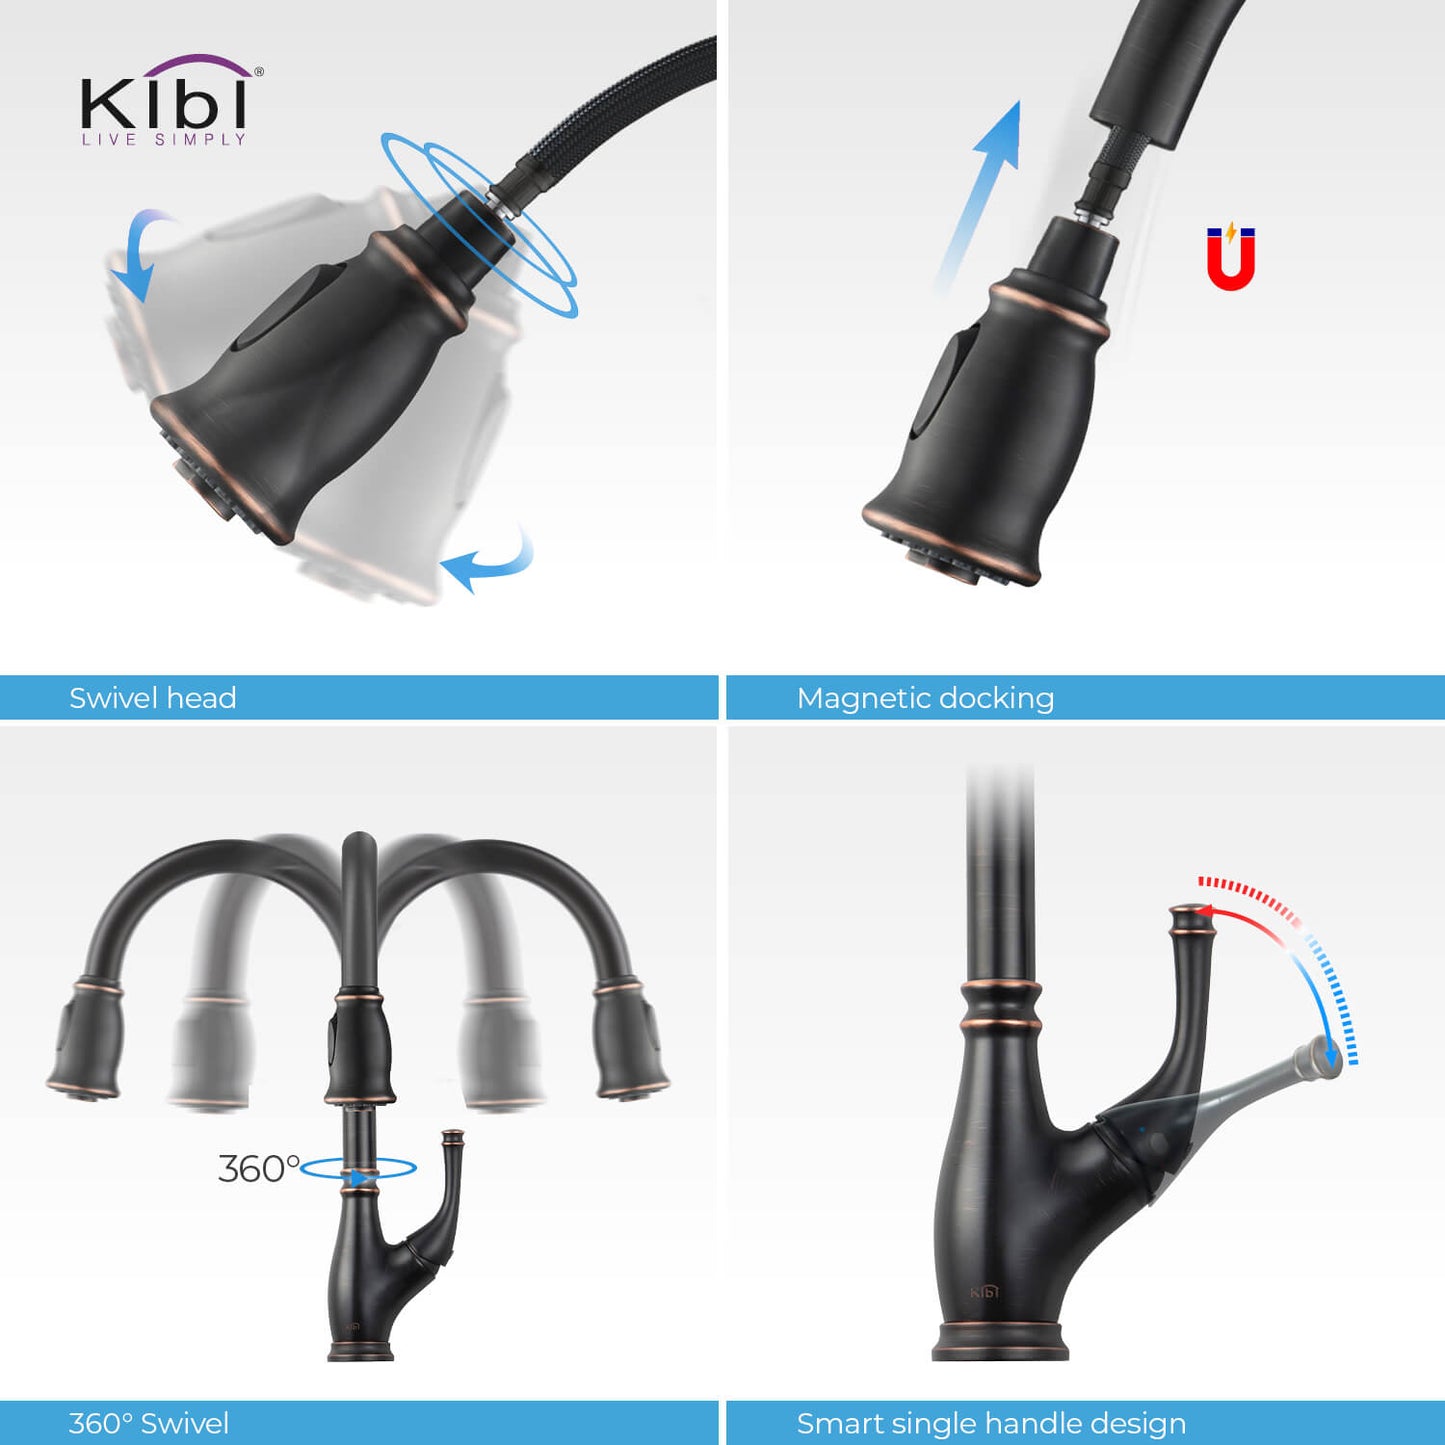 Kibi Summit Single Handle High Arc Pull Down Kitchen Faucet in Oil Rubbed Bronze Finish